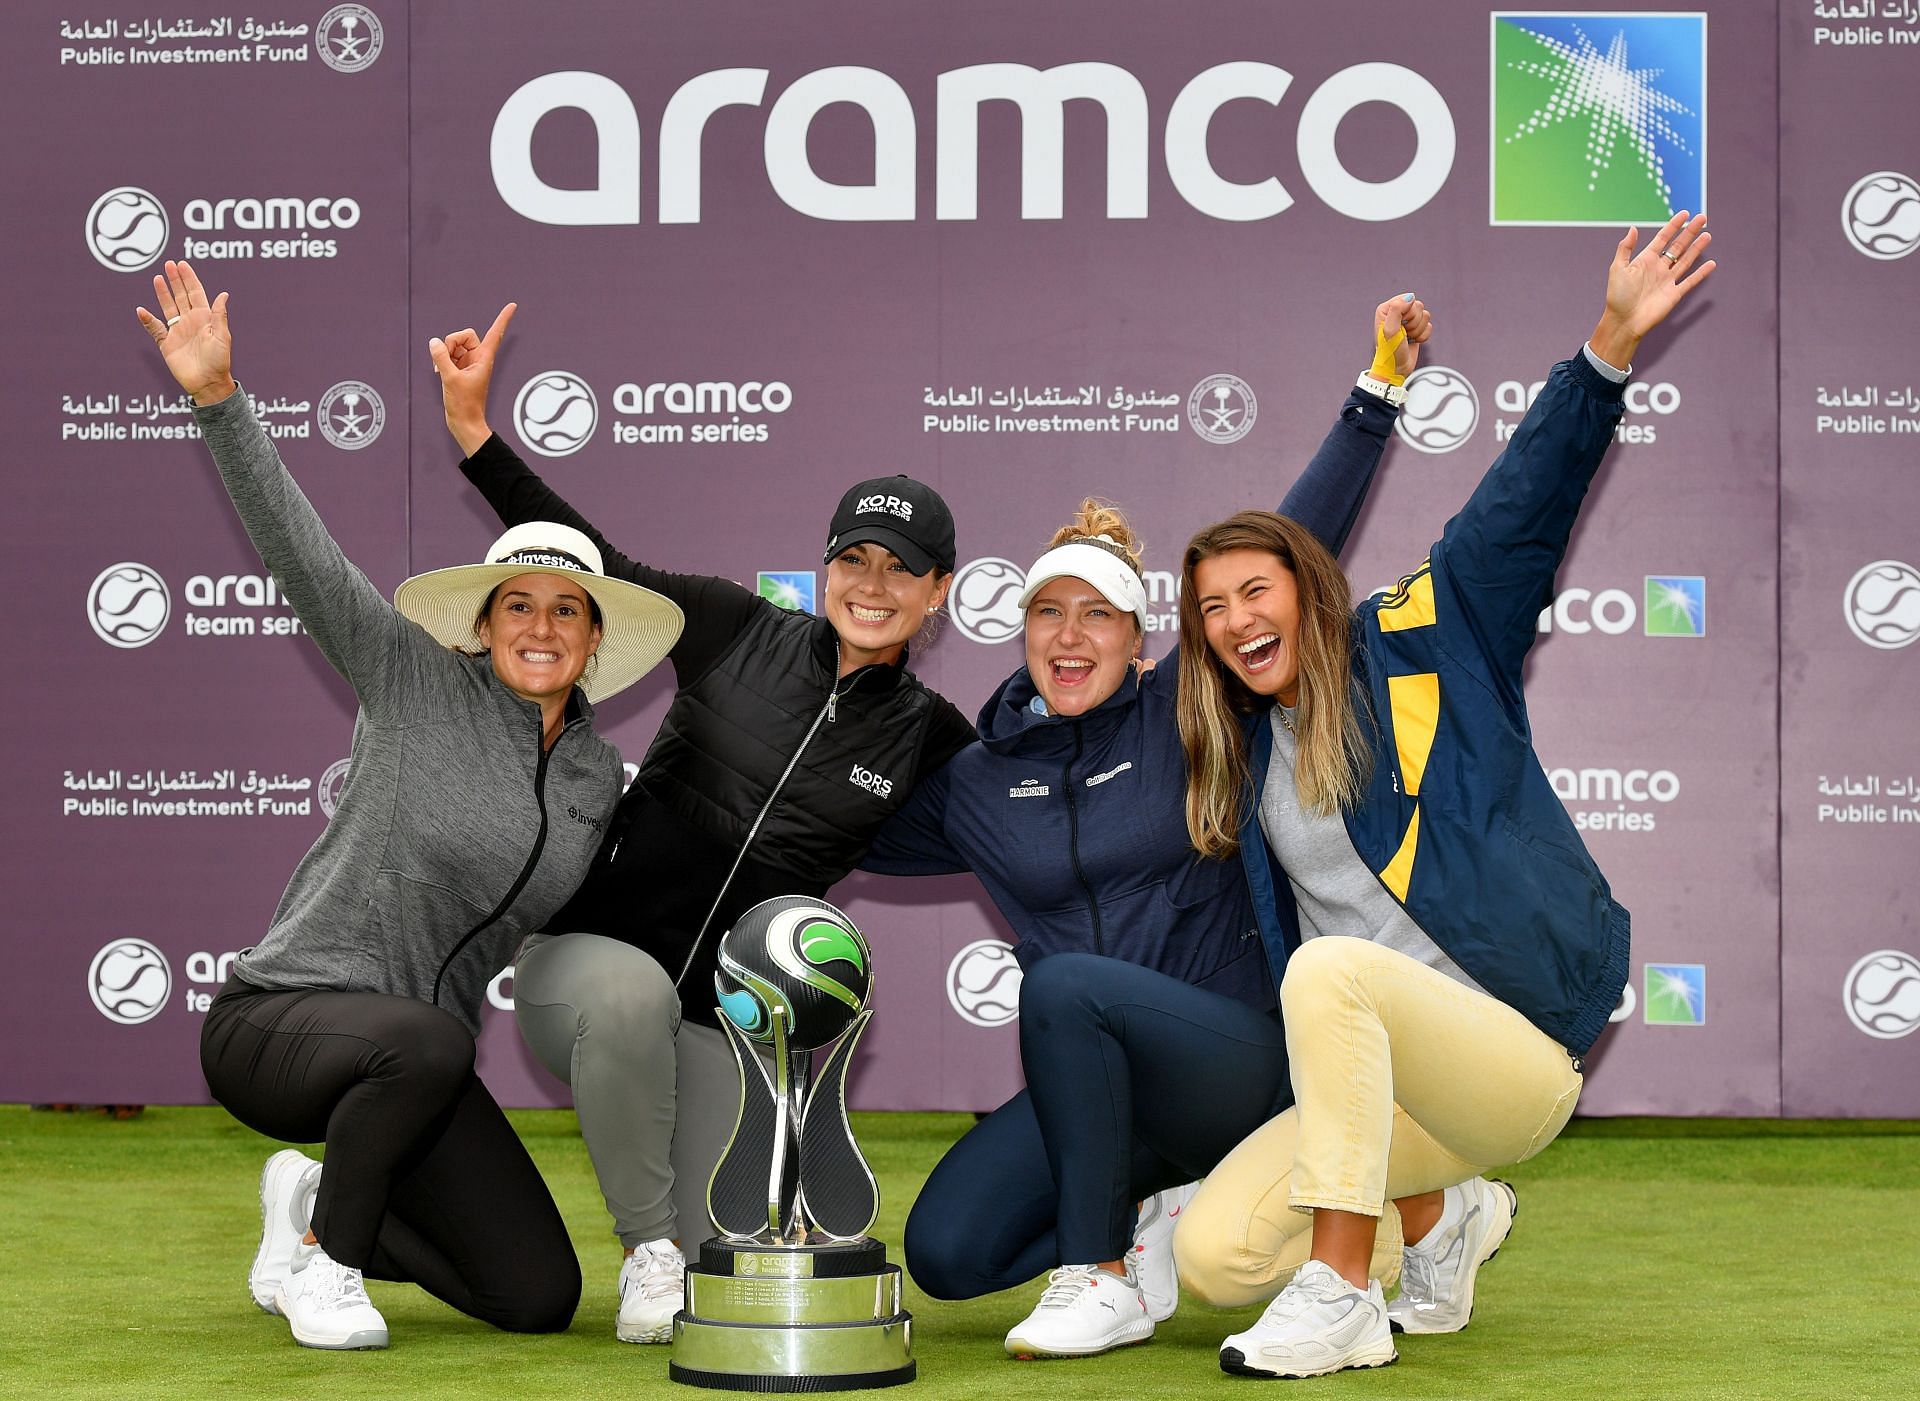 Team United states after win with the 2022 Aramco Team Series trophy - London (via Getty images)